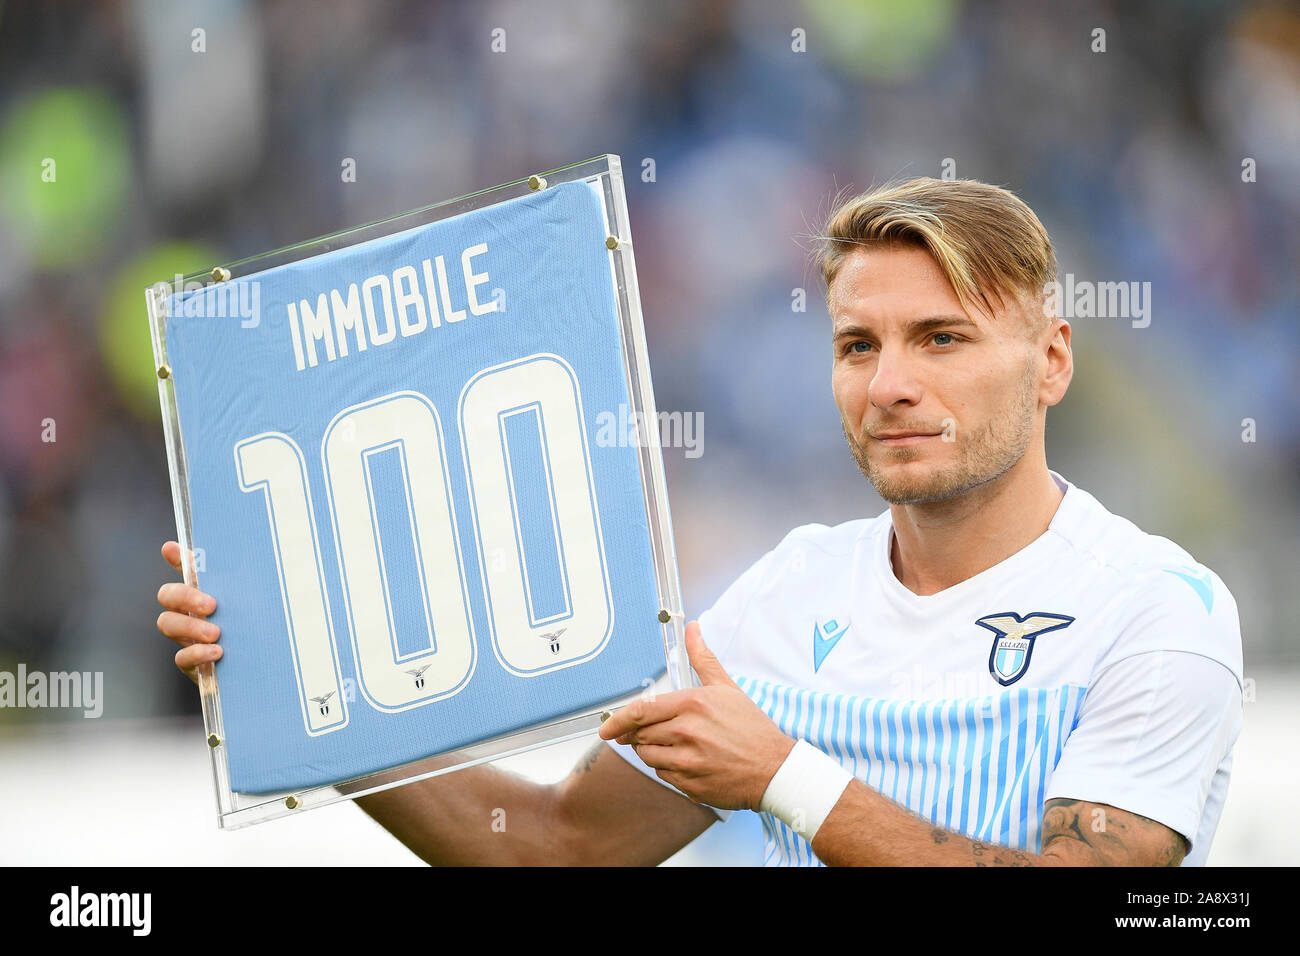 Rome, Italy. 10th Nov, 2019. Ciro Immobile of SS Lazio poses with the award received for 100 goals scored with his team during the Serie A match between Lazio and Lecce at Stadio Olimpico, Rome, Italy on 10 November 2019. Photo by Giuseppe Maffia. Credit: UK Sports Pics Ltd/Alamy Live News Stock Photo